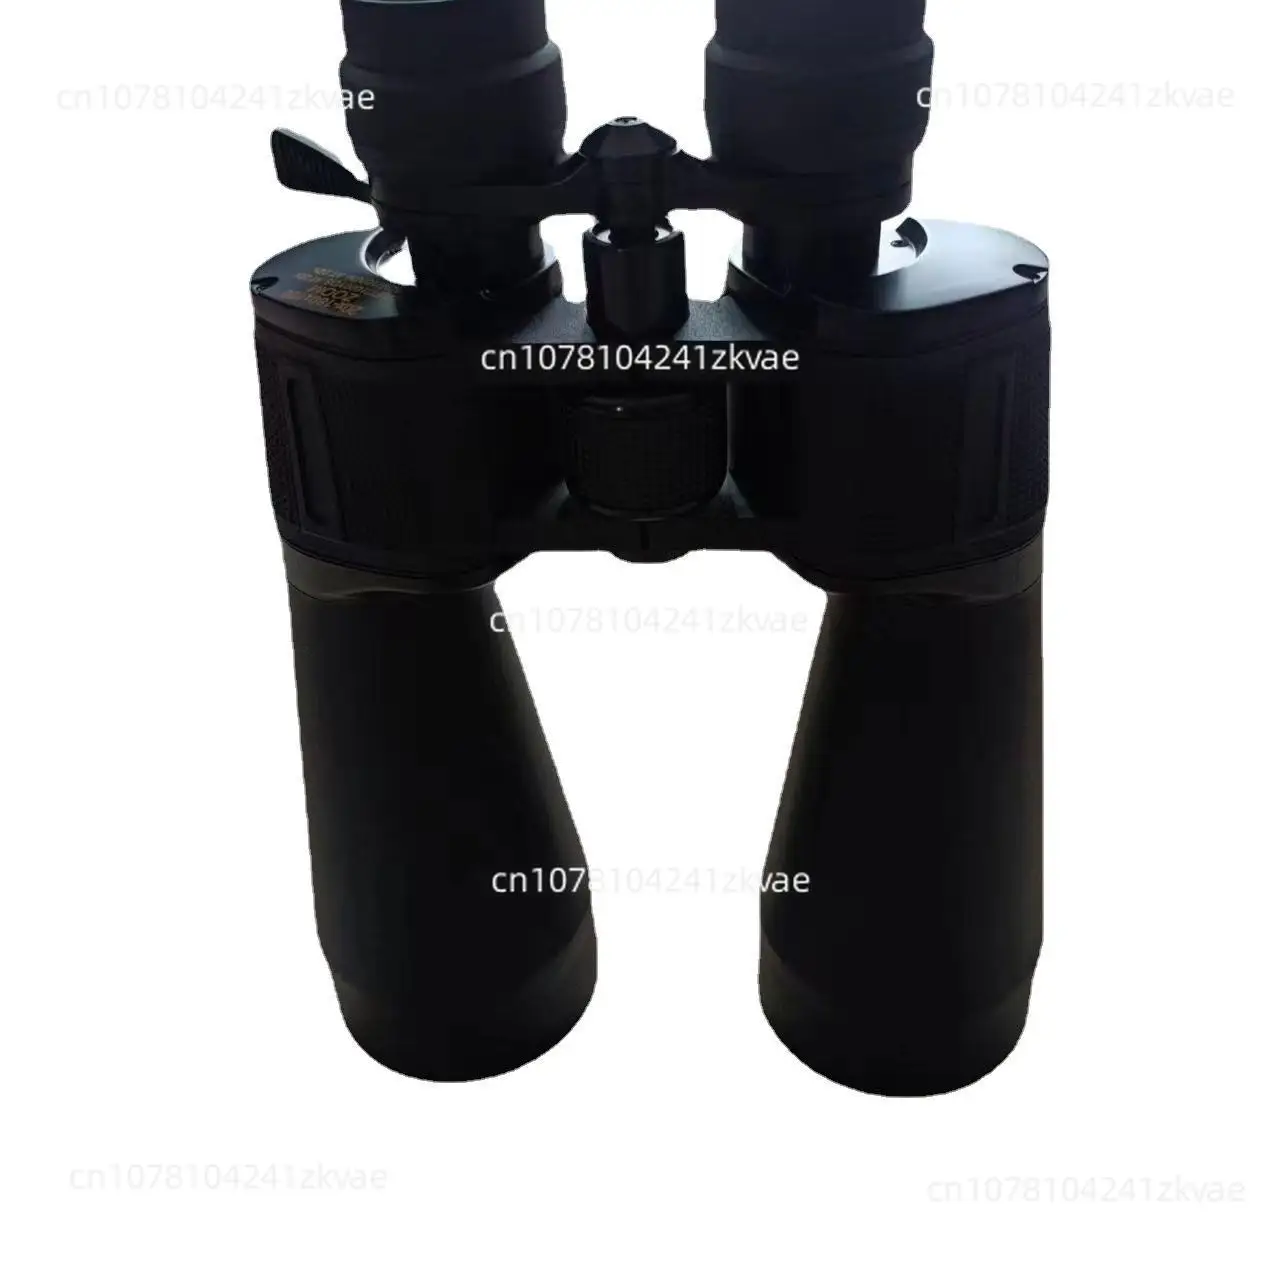 

20-180*100 binoculars 70 zoom and high magnification professional HD large aperture telescope to see the wasp.